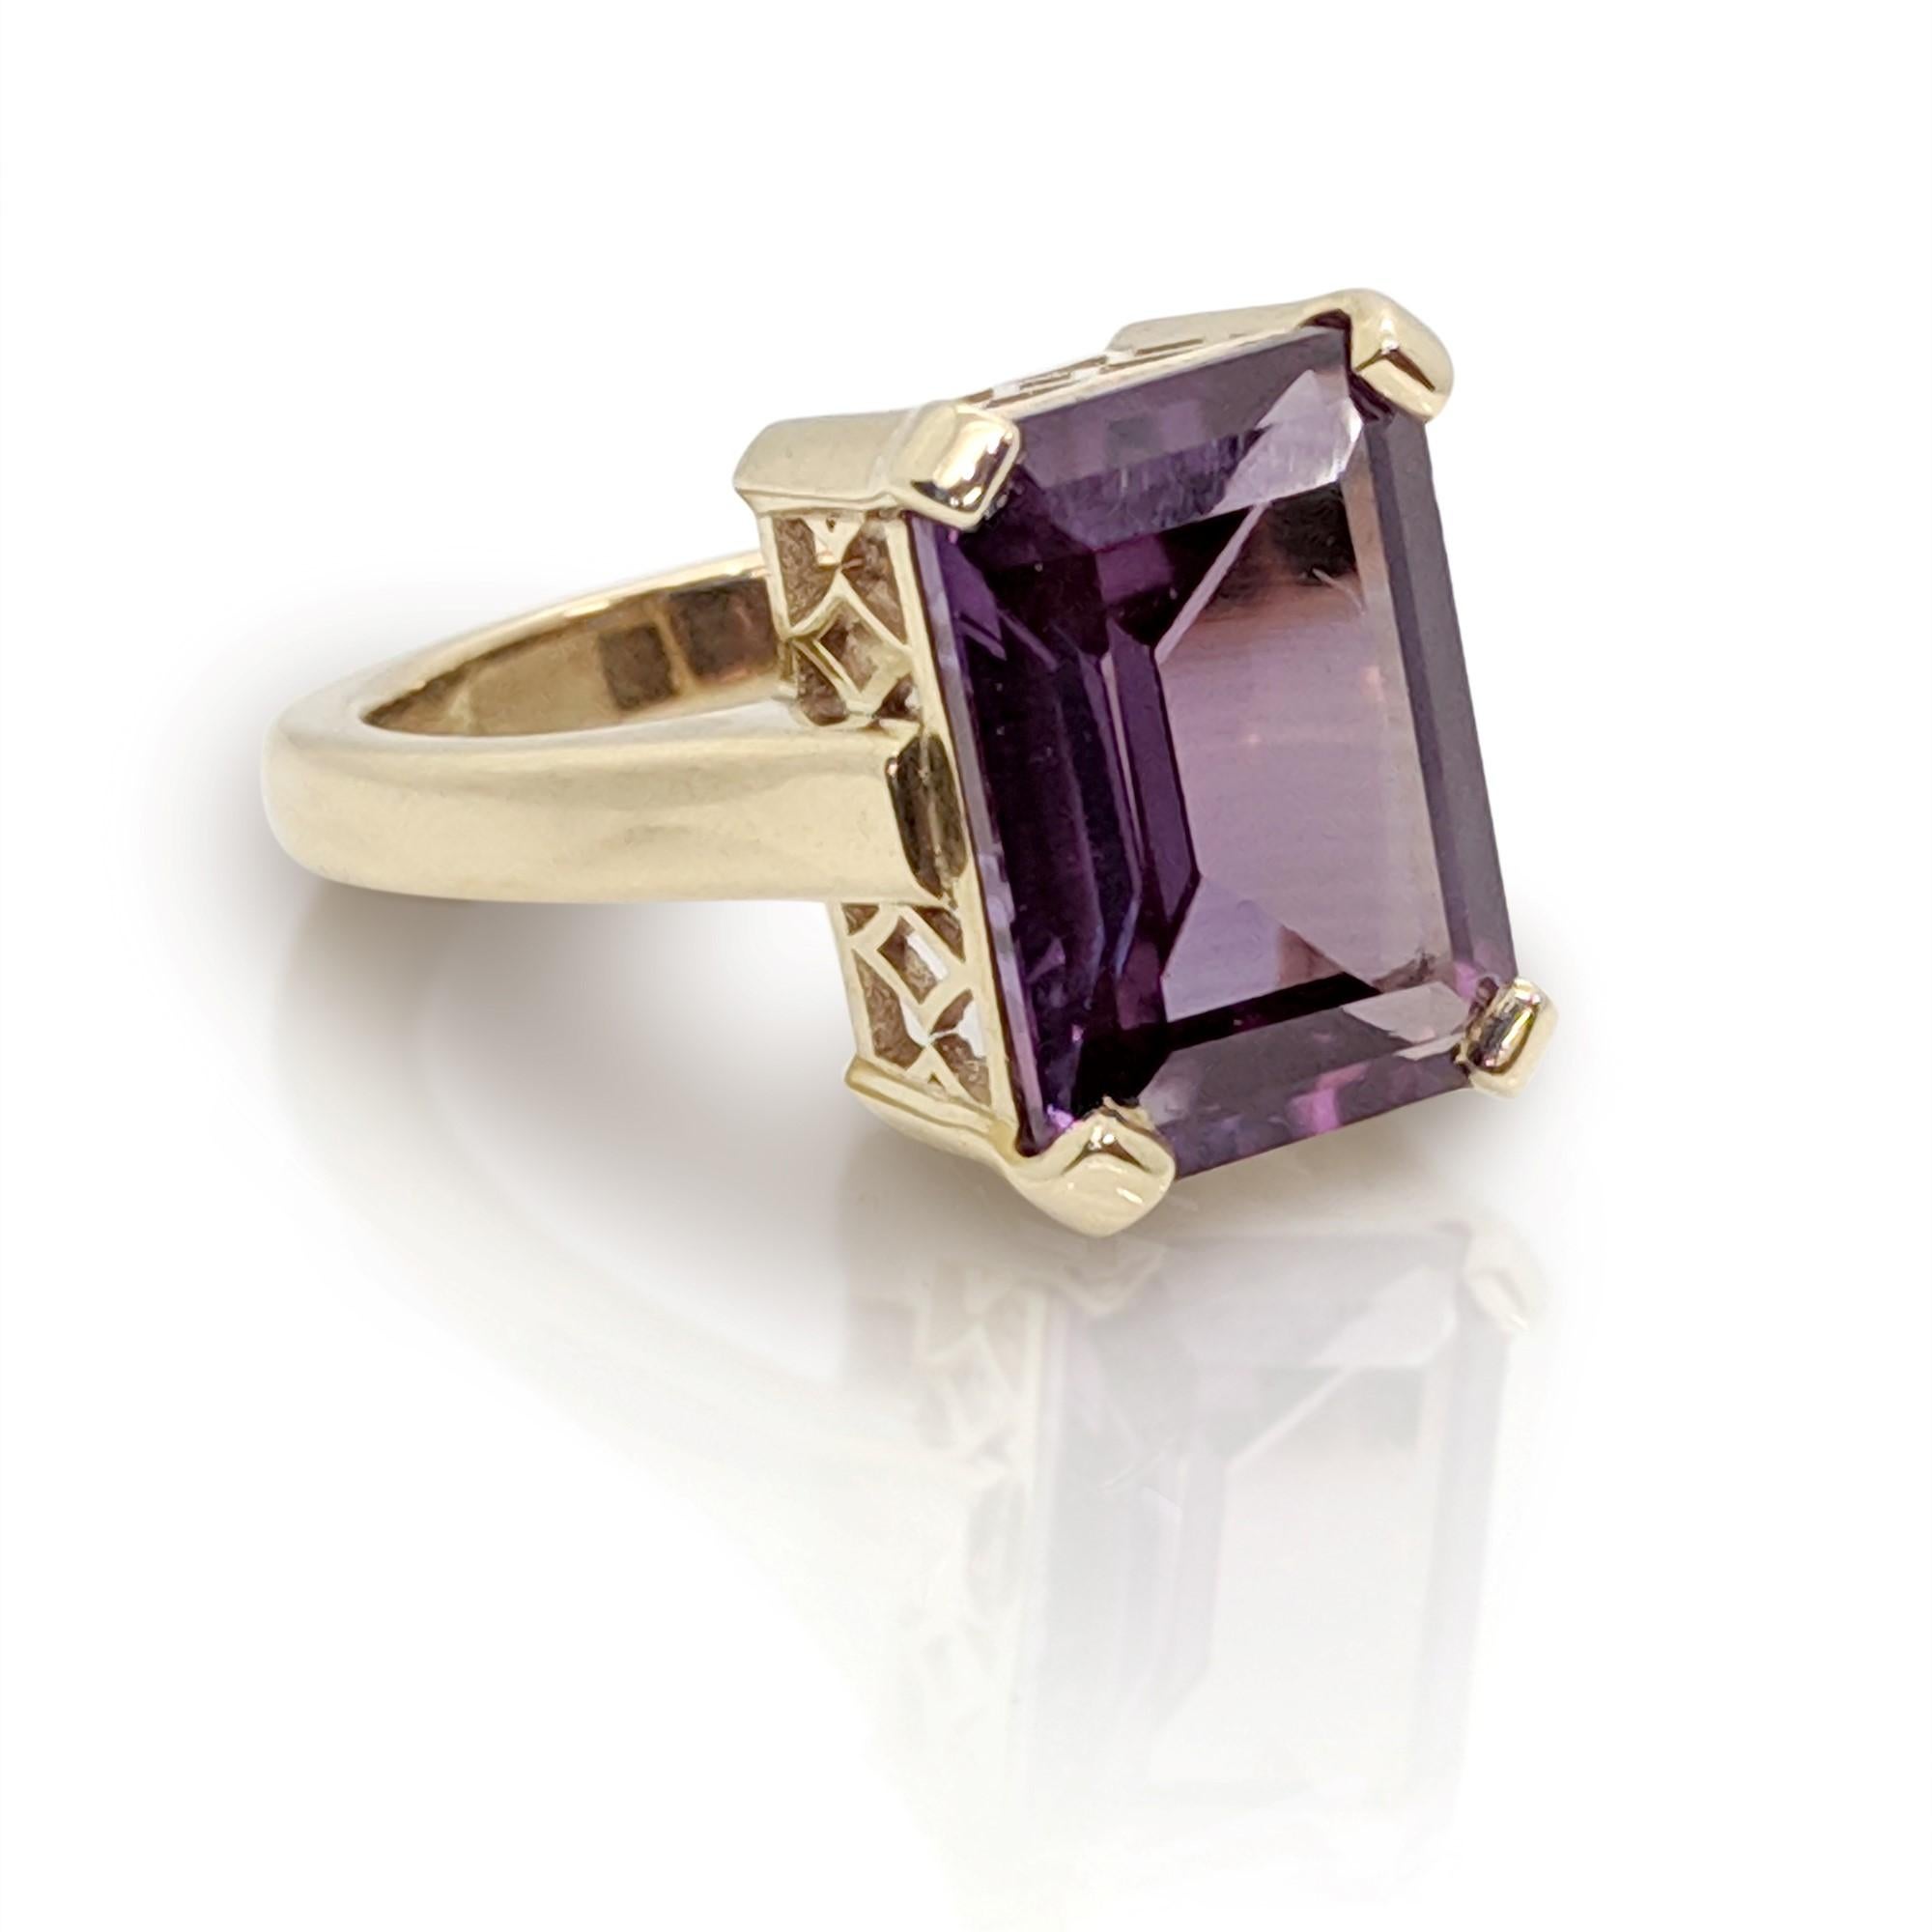 Art Deco Style Emerald Cut  Amethyst Ring

This gorgeous hand-crafted is set with a large and attractive Bluish- purple Lab grown Alexandrite in 4 claws setting. The ring is made of yellow gold.

1 x  Emerald Cut  Amethyst , Colour is dark blue in